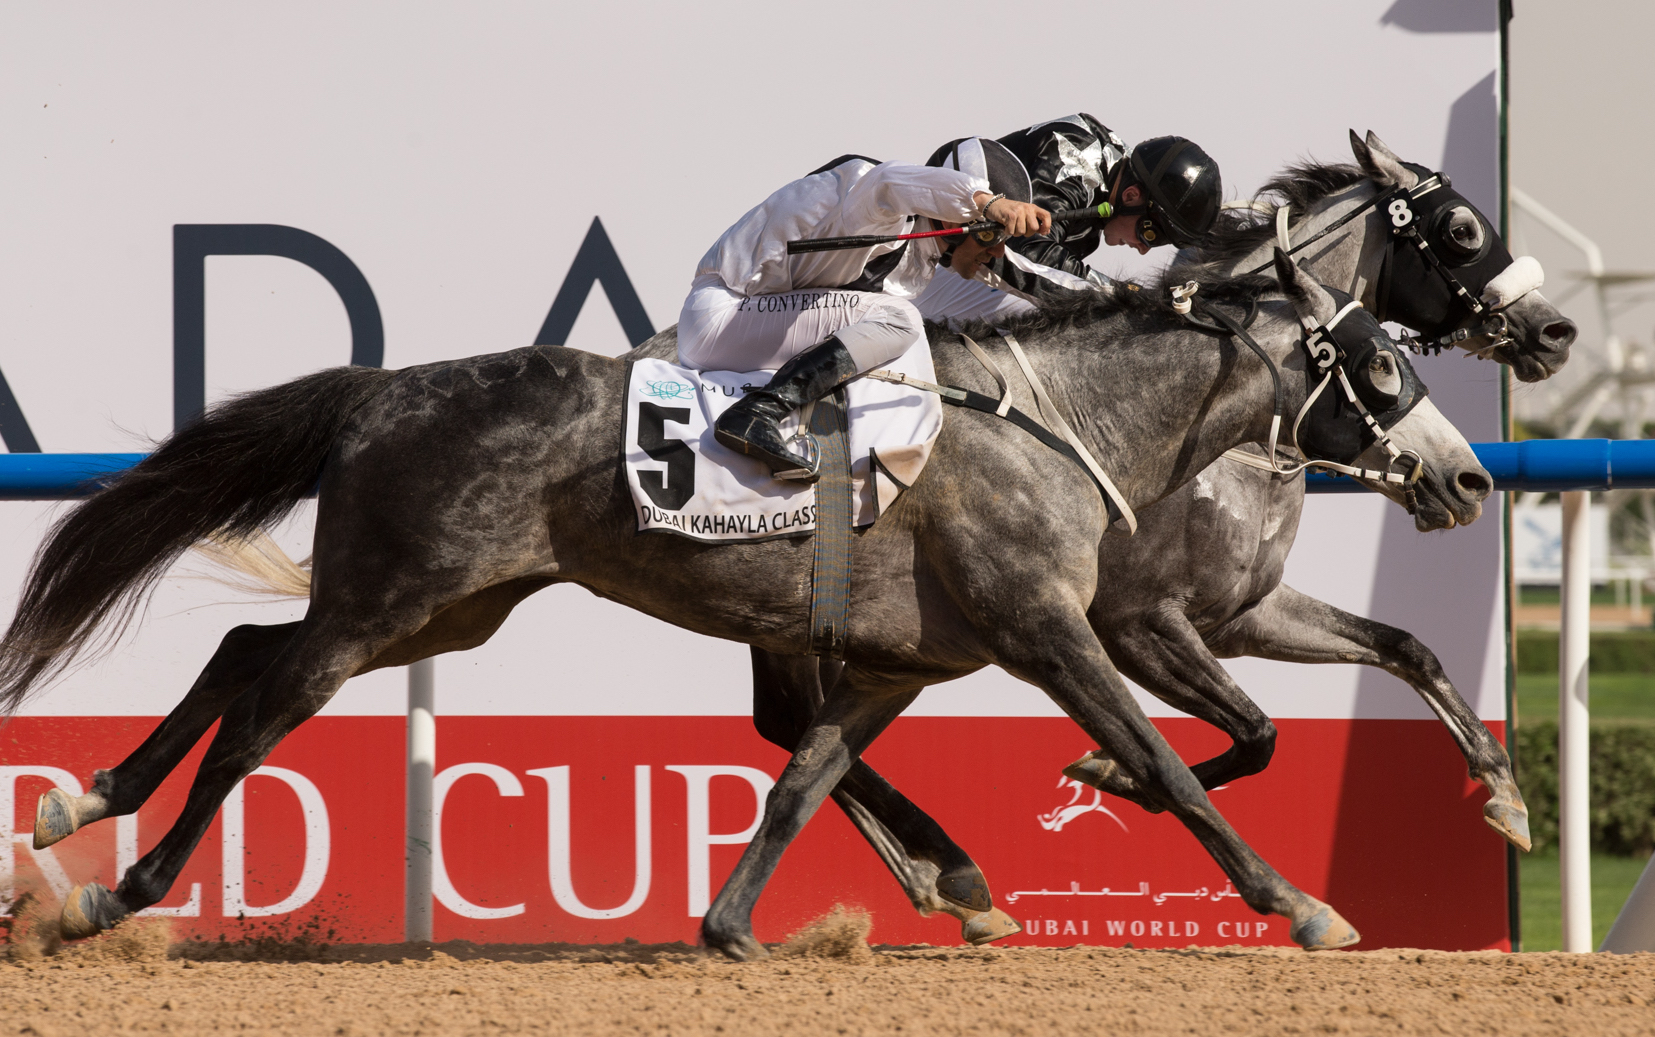 AF Maher (Tadhg O’Shea, far side) holds off Fazza Al Khaledia to win the Dubai Kahayla Classic by a nose in one of the most exciting finishes of Dubai World Cup day. Photo: Erika Rasmussen/Dubai Racing Club